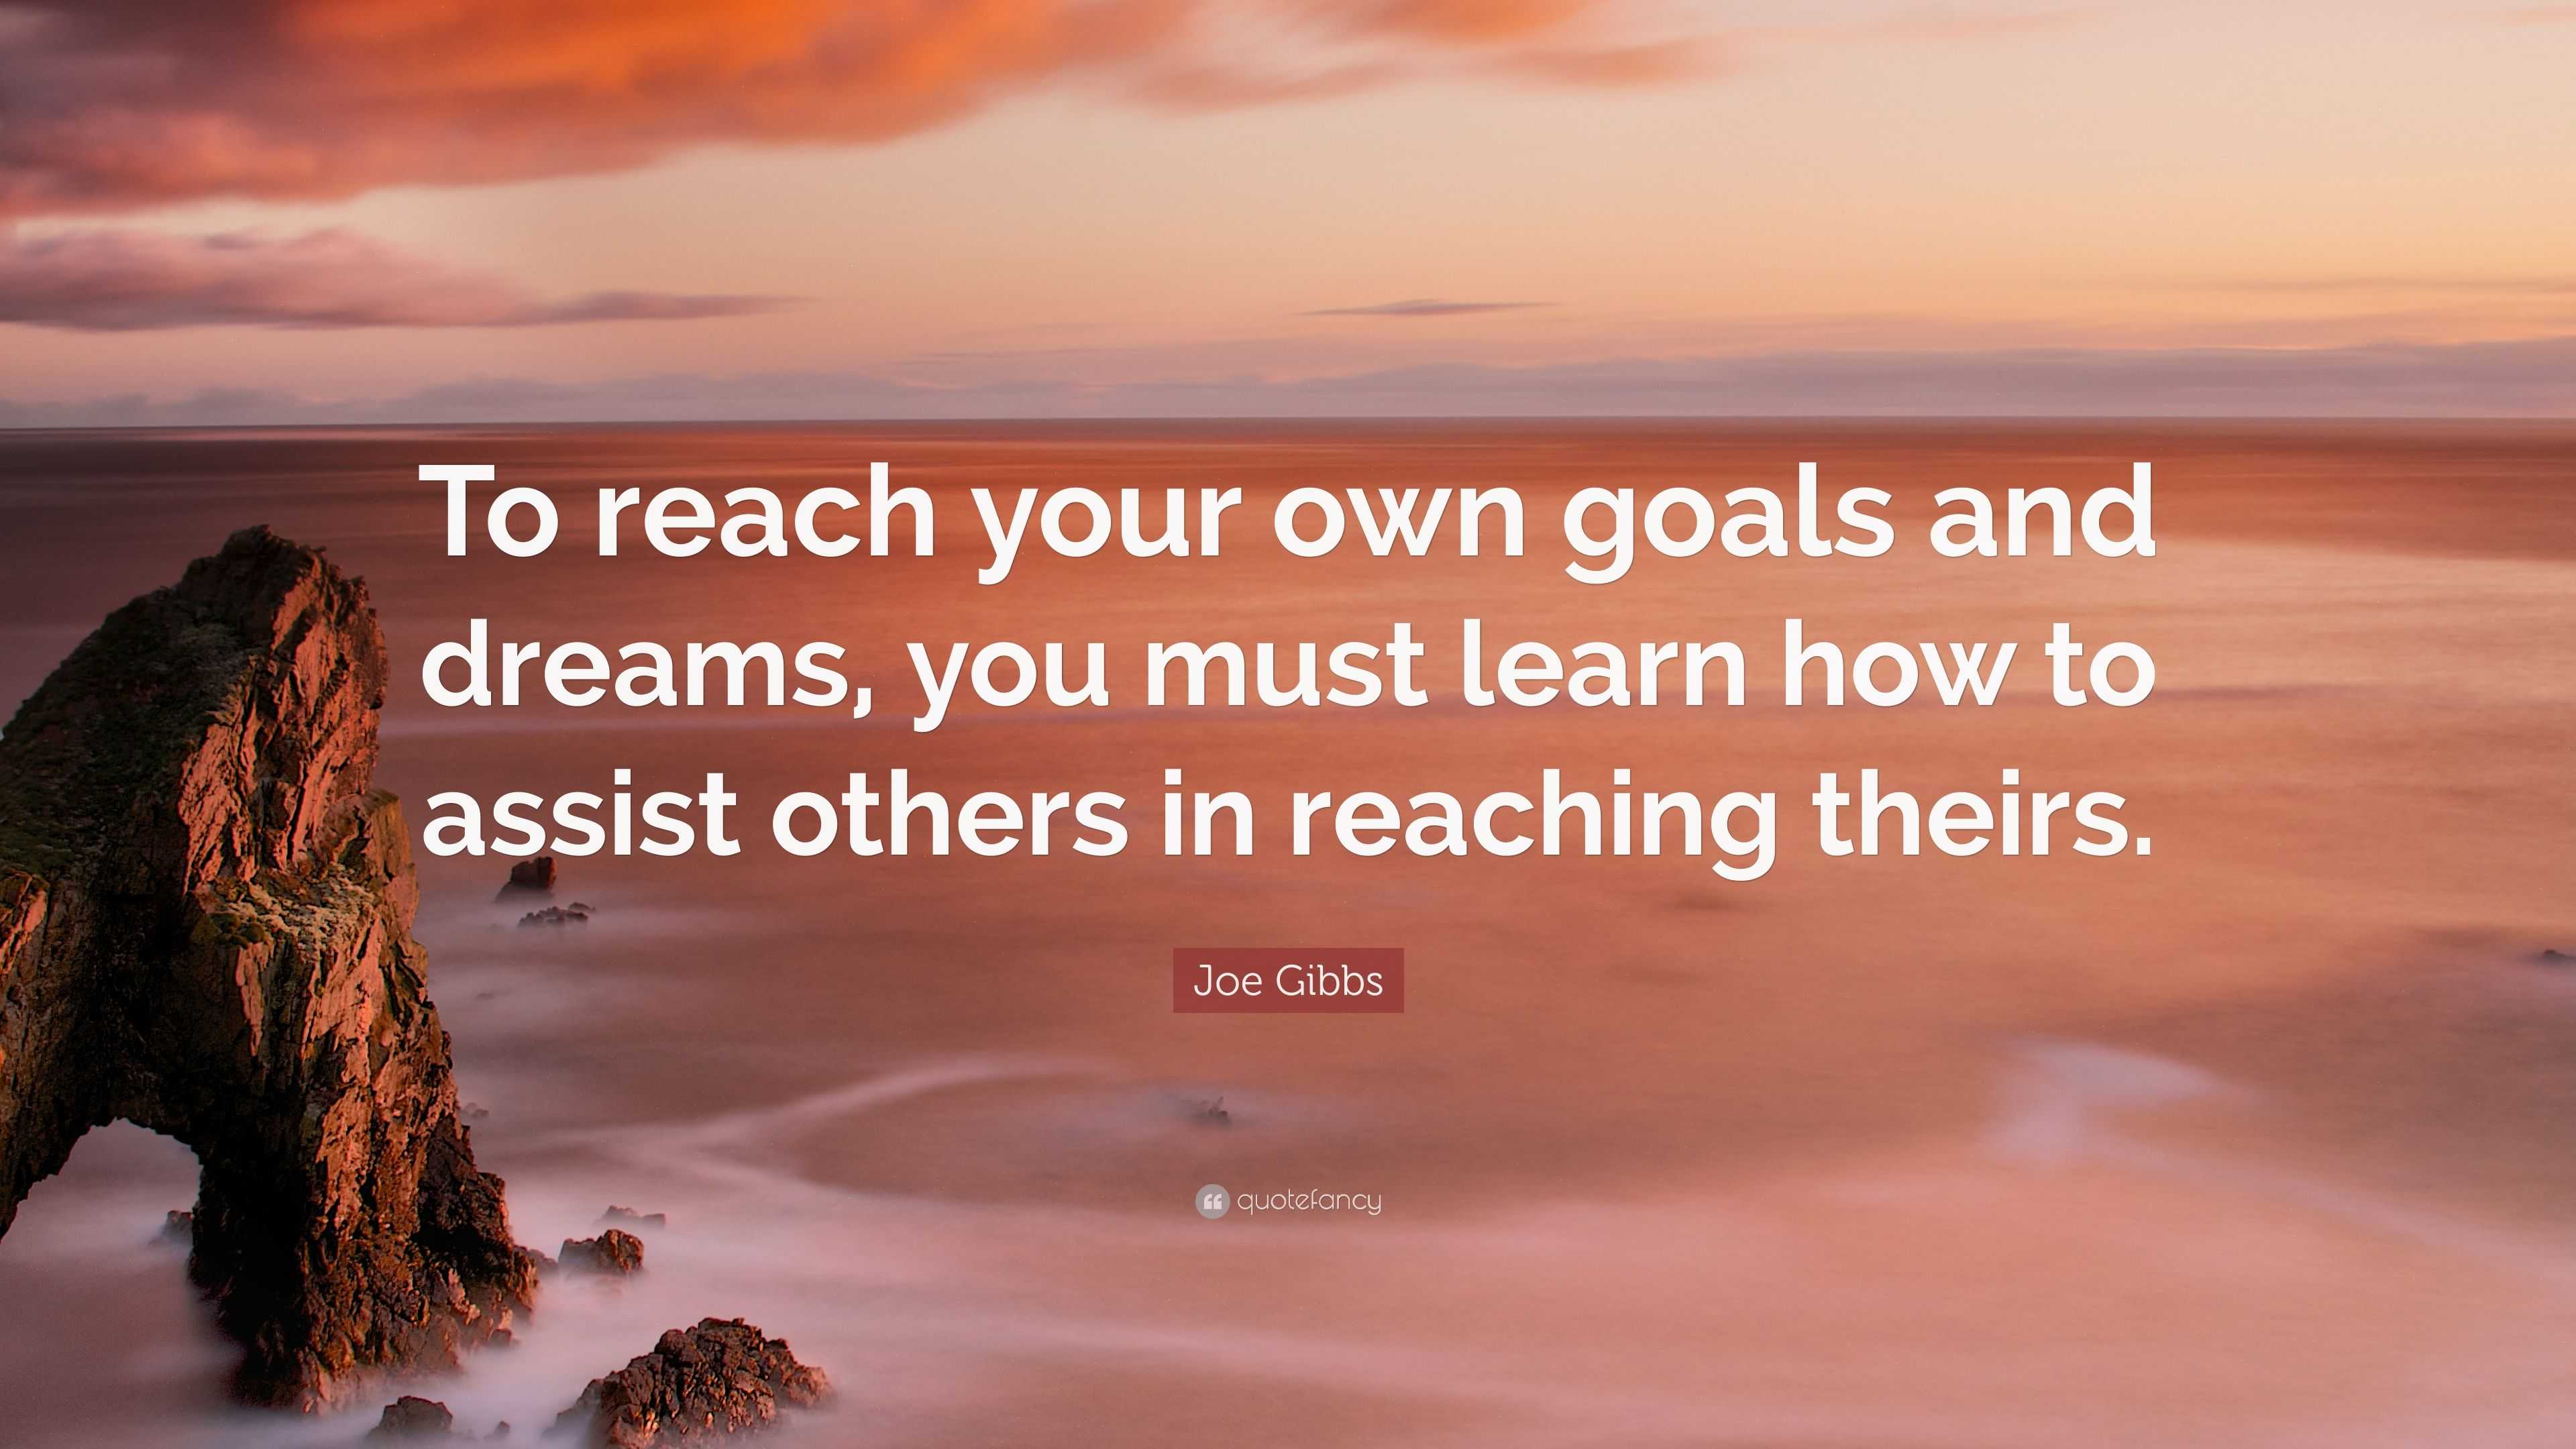 Joe Gibbs Quote: “To reach your own goals and dreams, you must learn